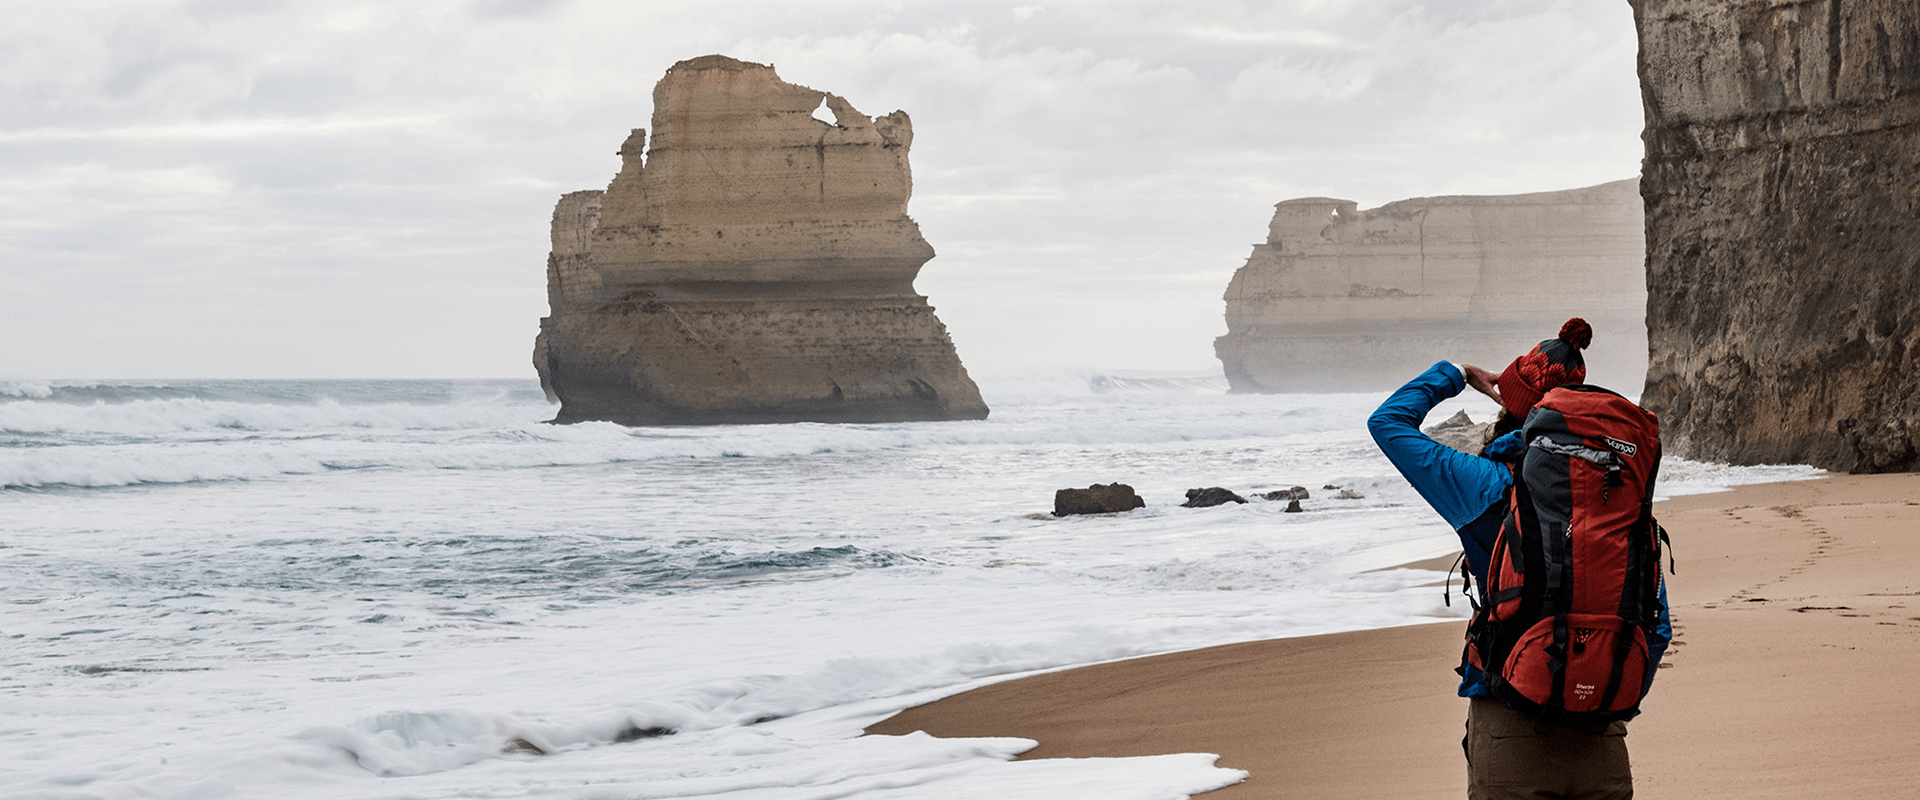 A hiker wears a beanie and a red hiking backpack looks out at the Twelve Apostles to an ocean vista on a sandy beach.